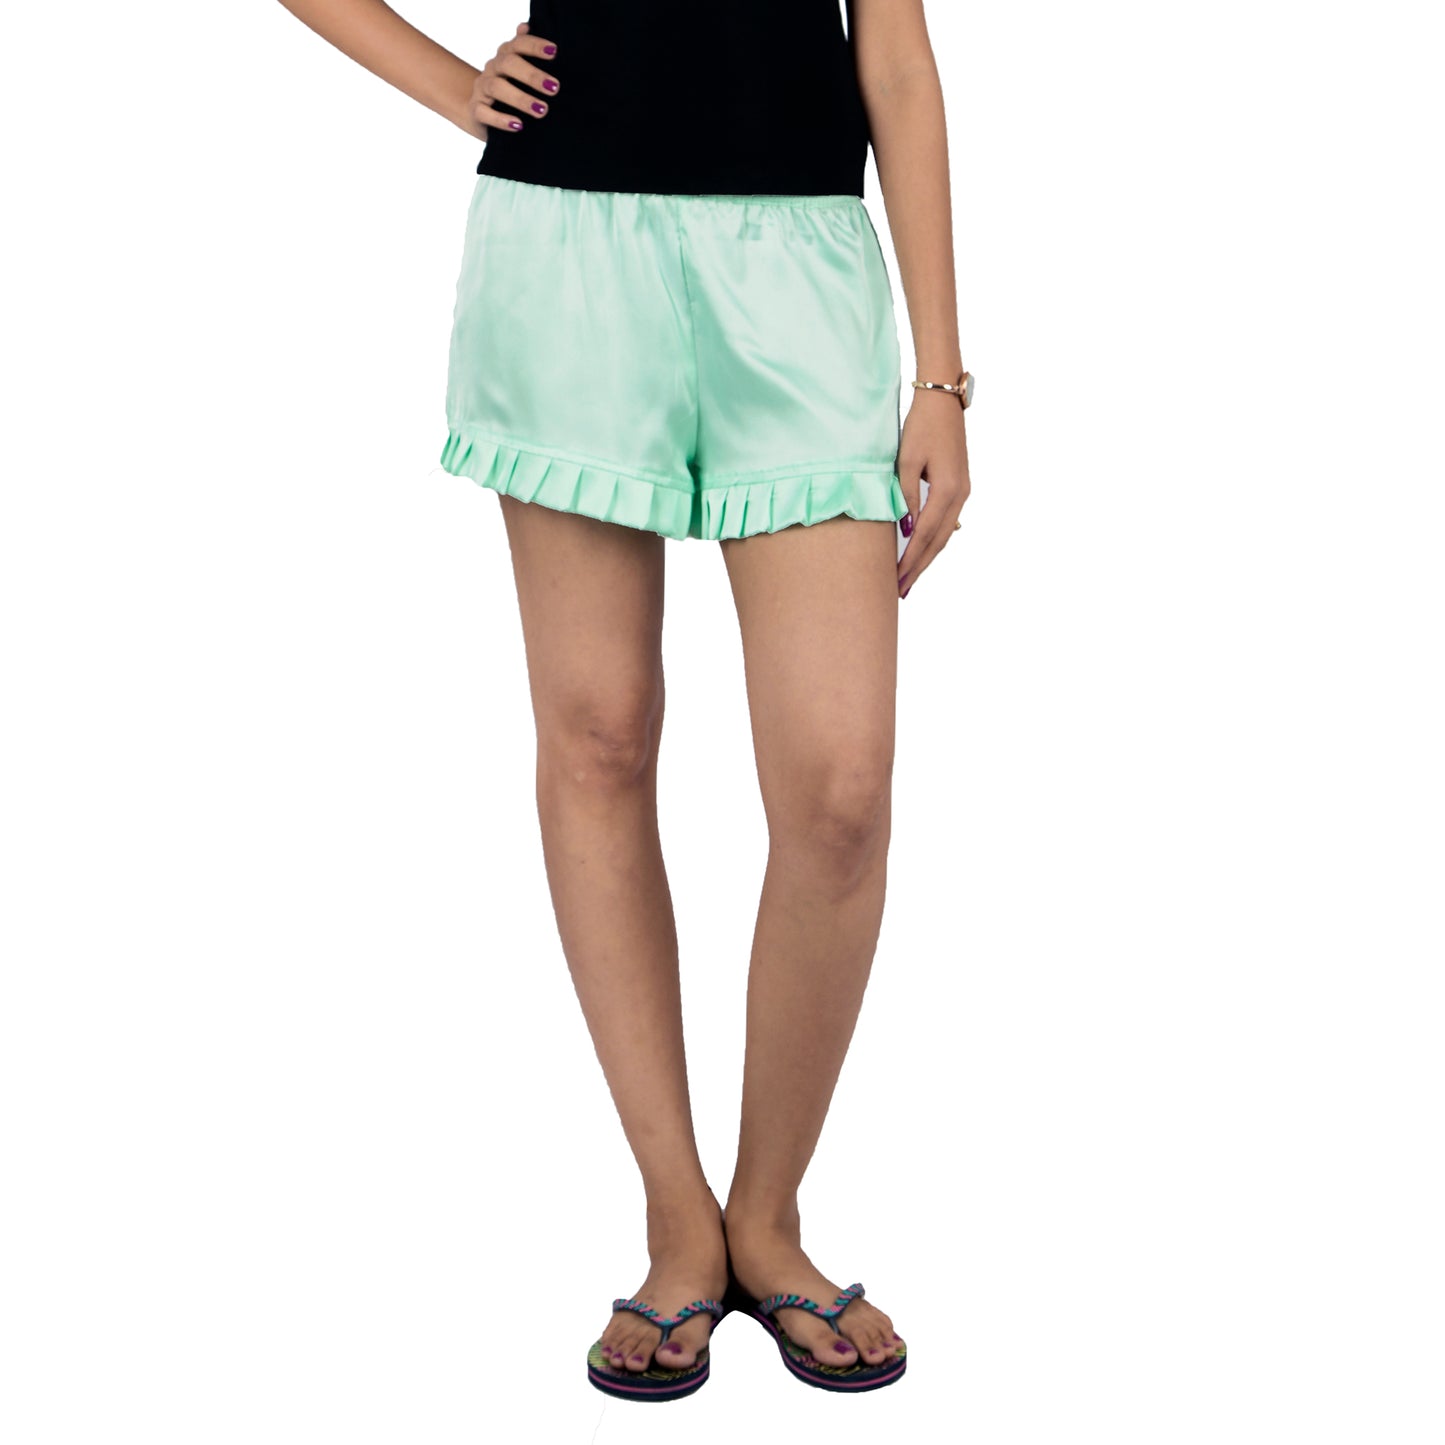 nightwear-satin-shorts-with-delicate-frills-online-India